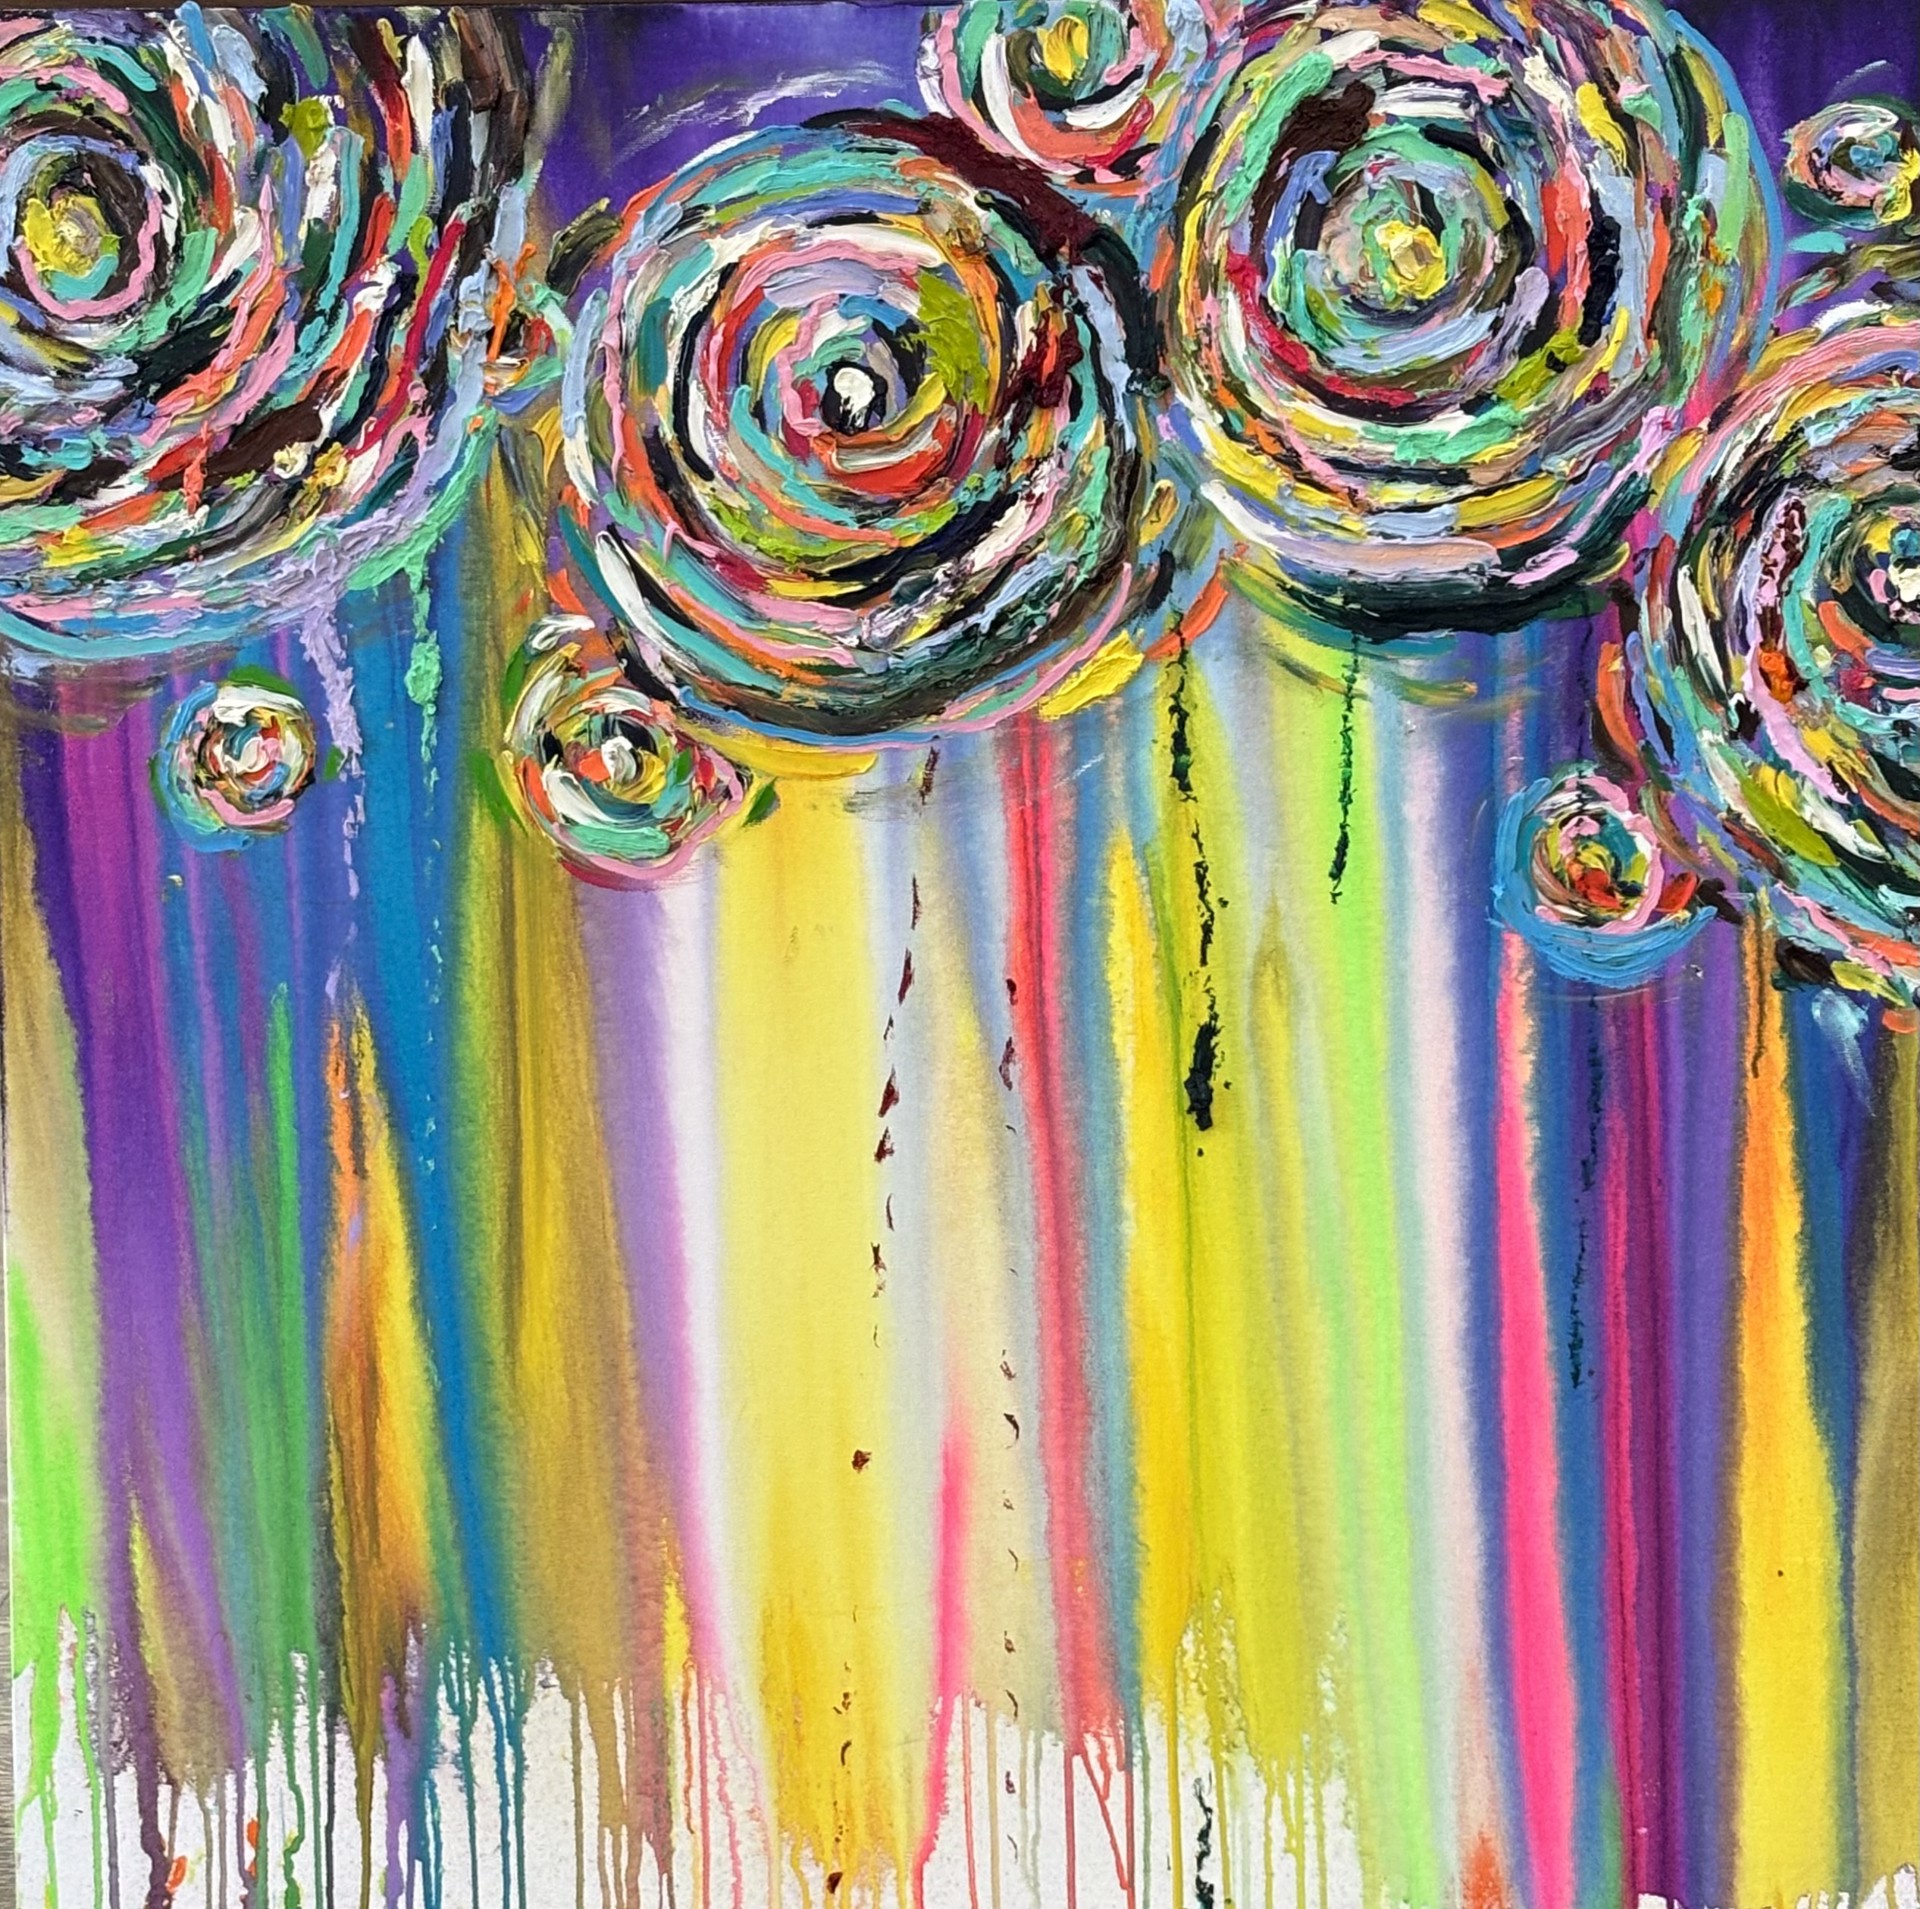 Lollipops by Christina Alford